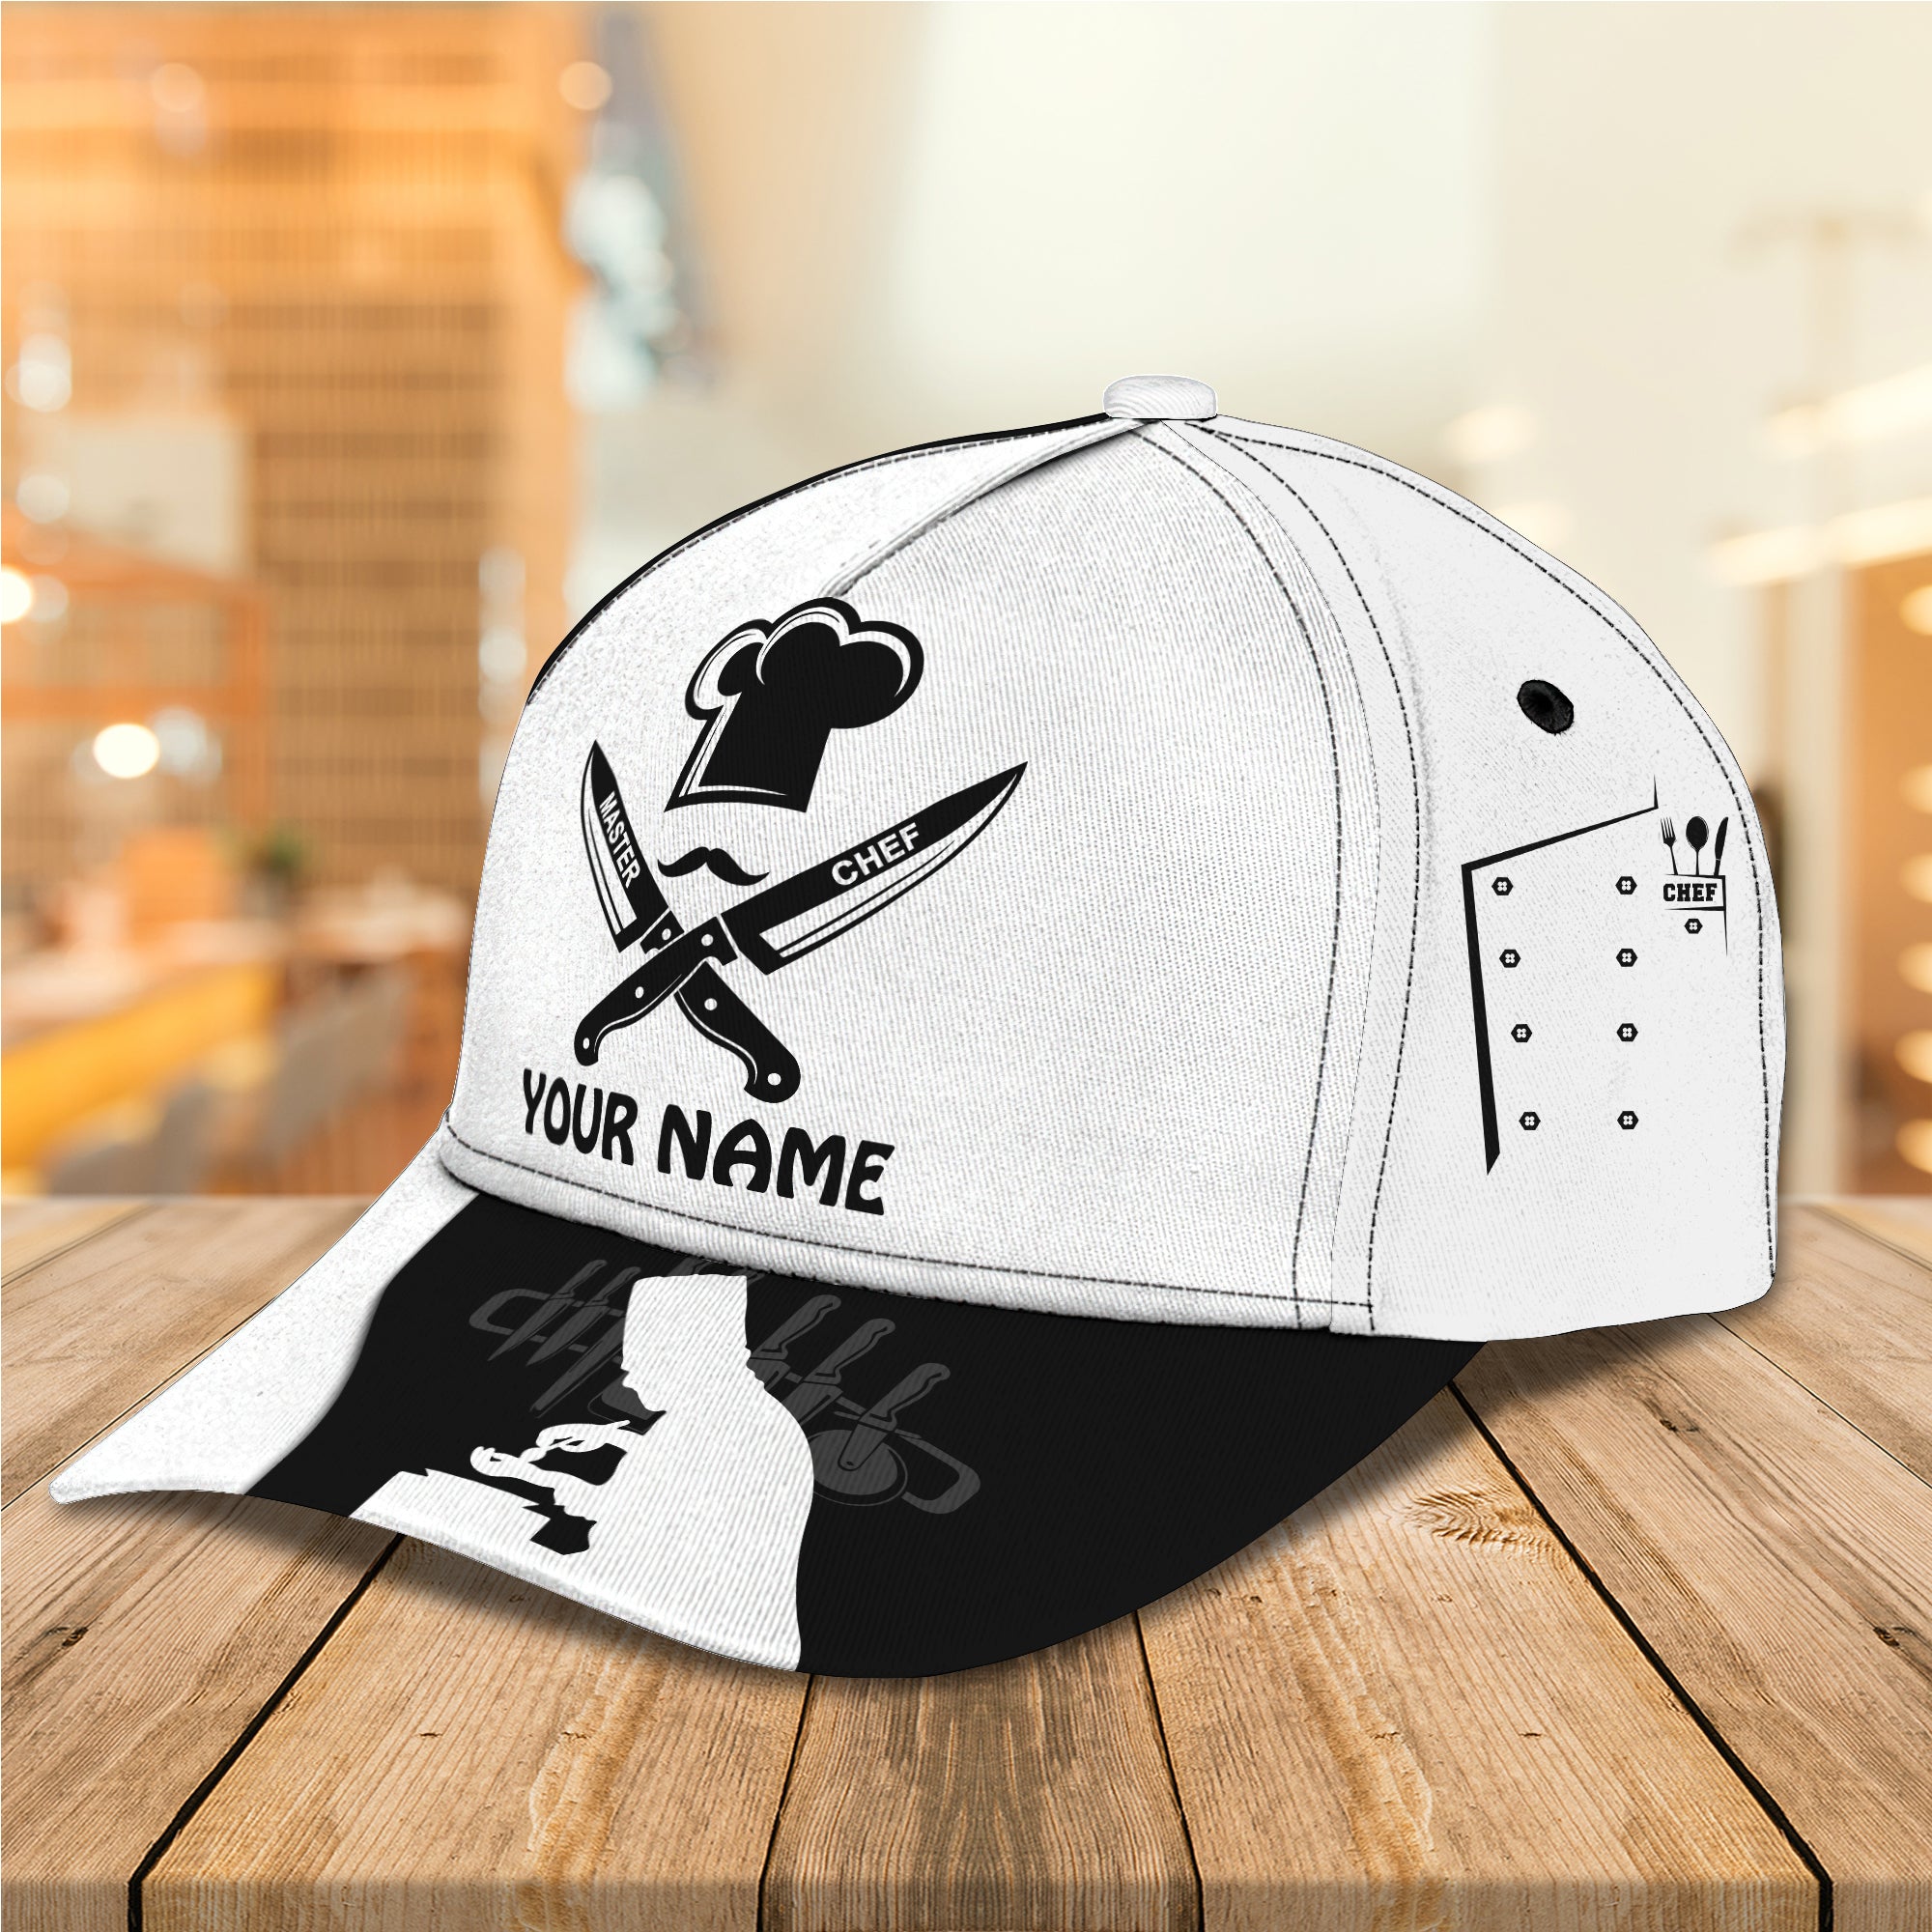 CHEF  - Personalized Name Cap - Ntt68